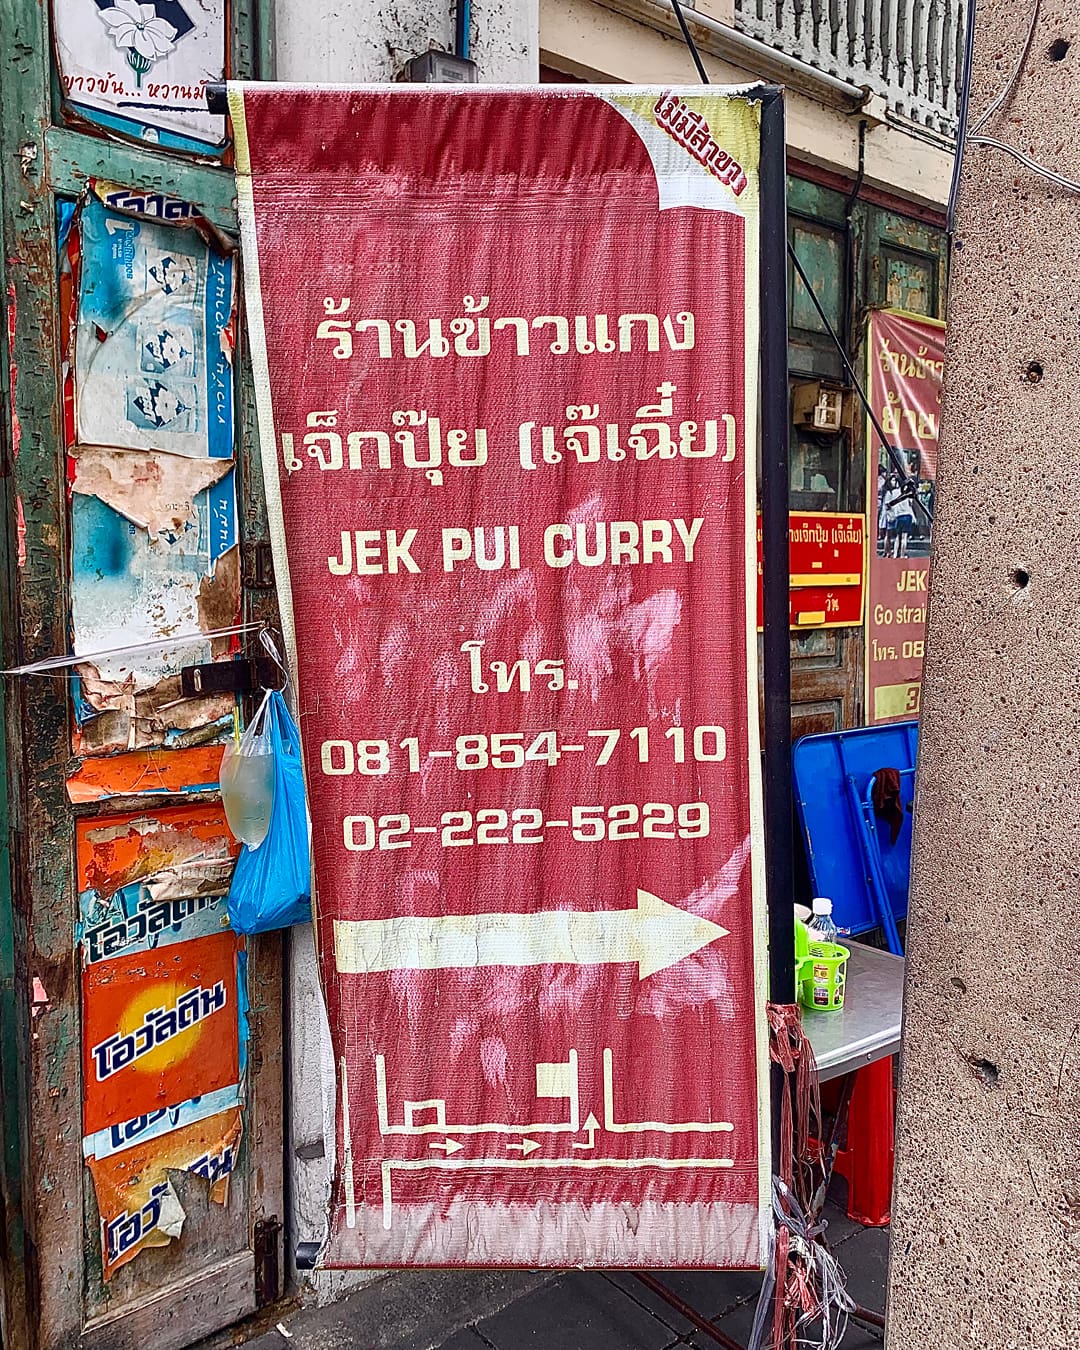 The best street food in Bangkok | Jek Pui Curry is a legendary food stall